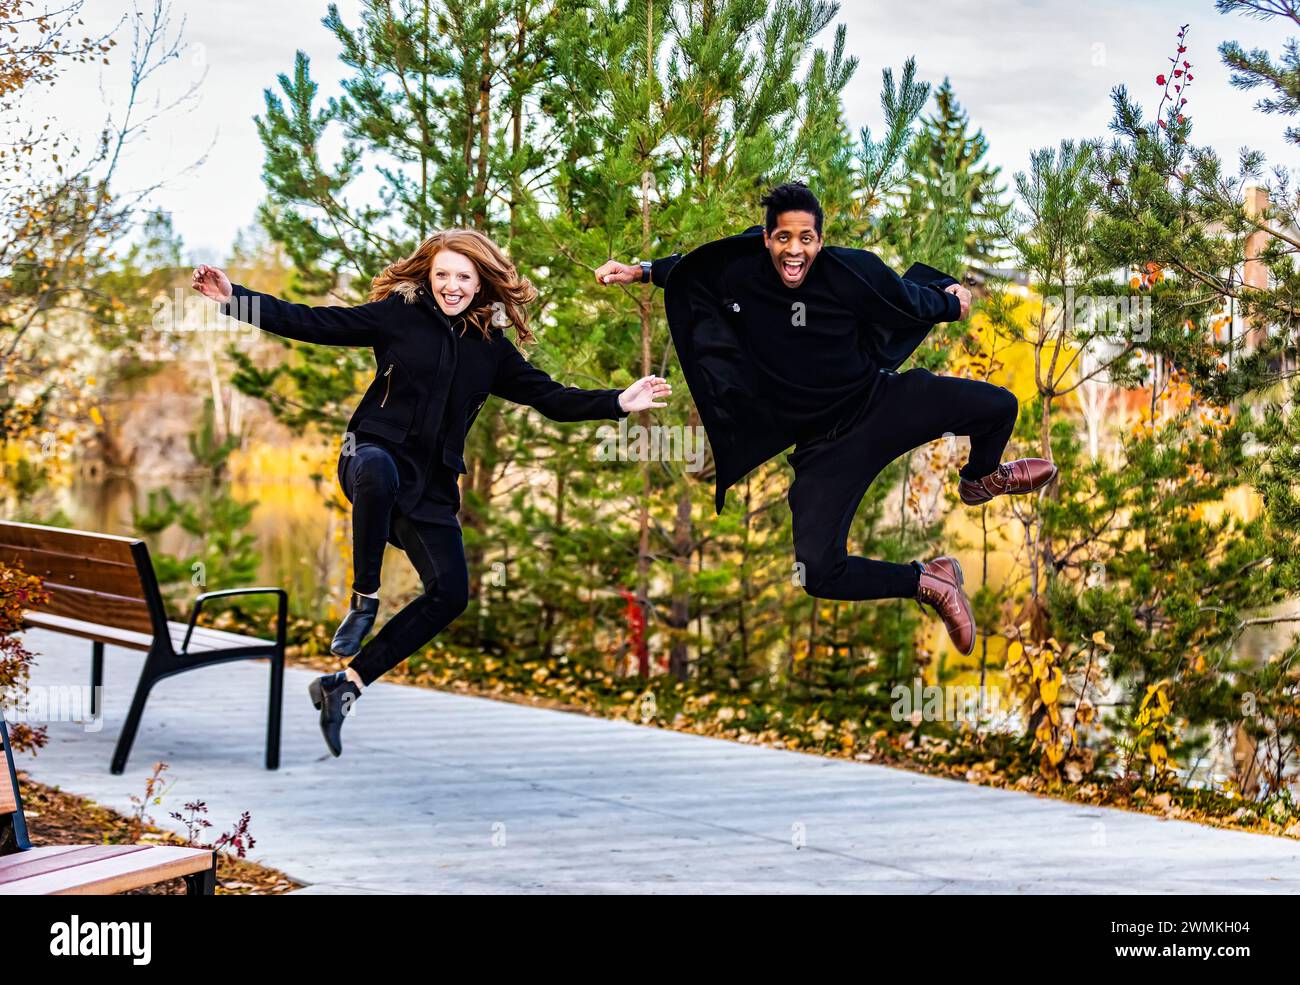 Portrait of a mixed race couple jumping up in the air, smiling at the camera and spending quality time together during a fall family outing in a ci... Stock Photo